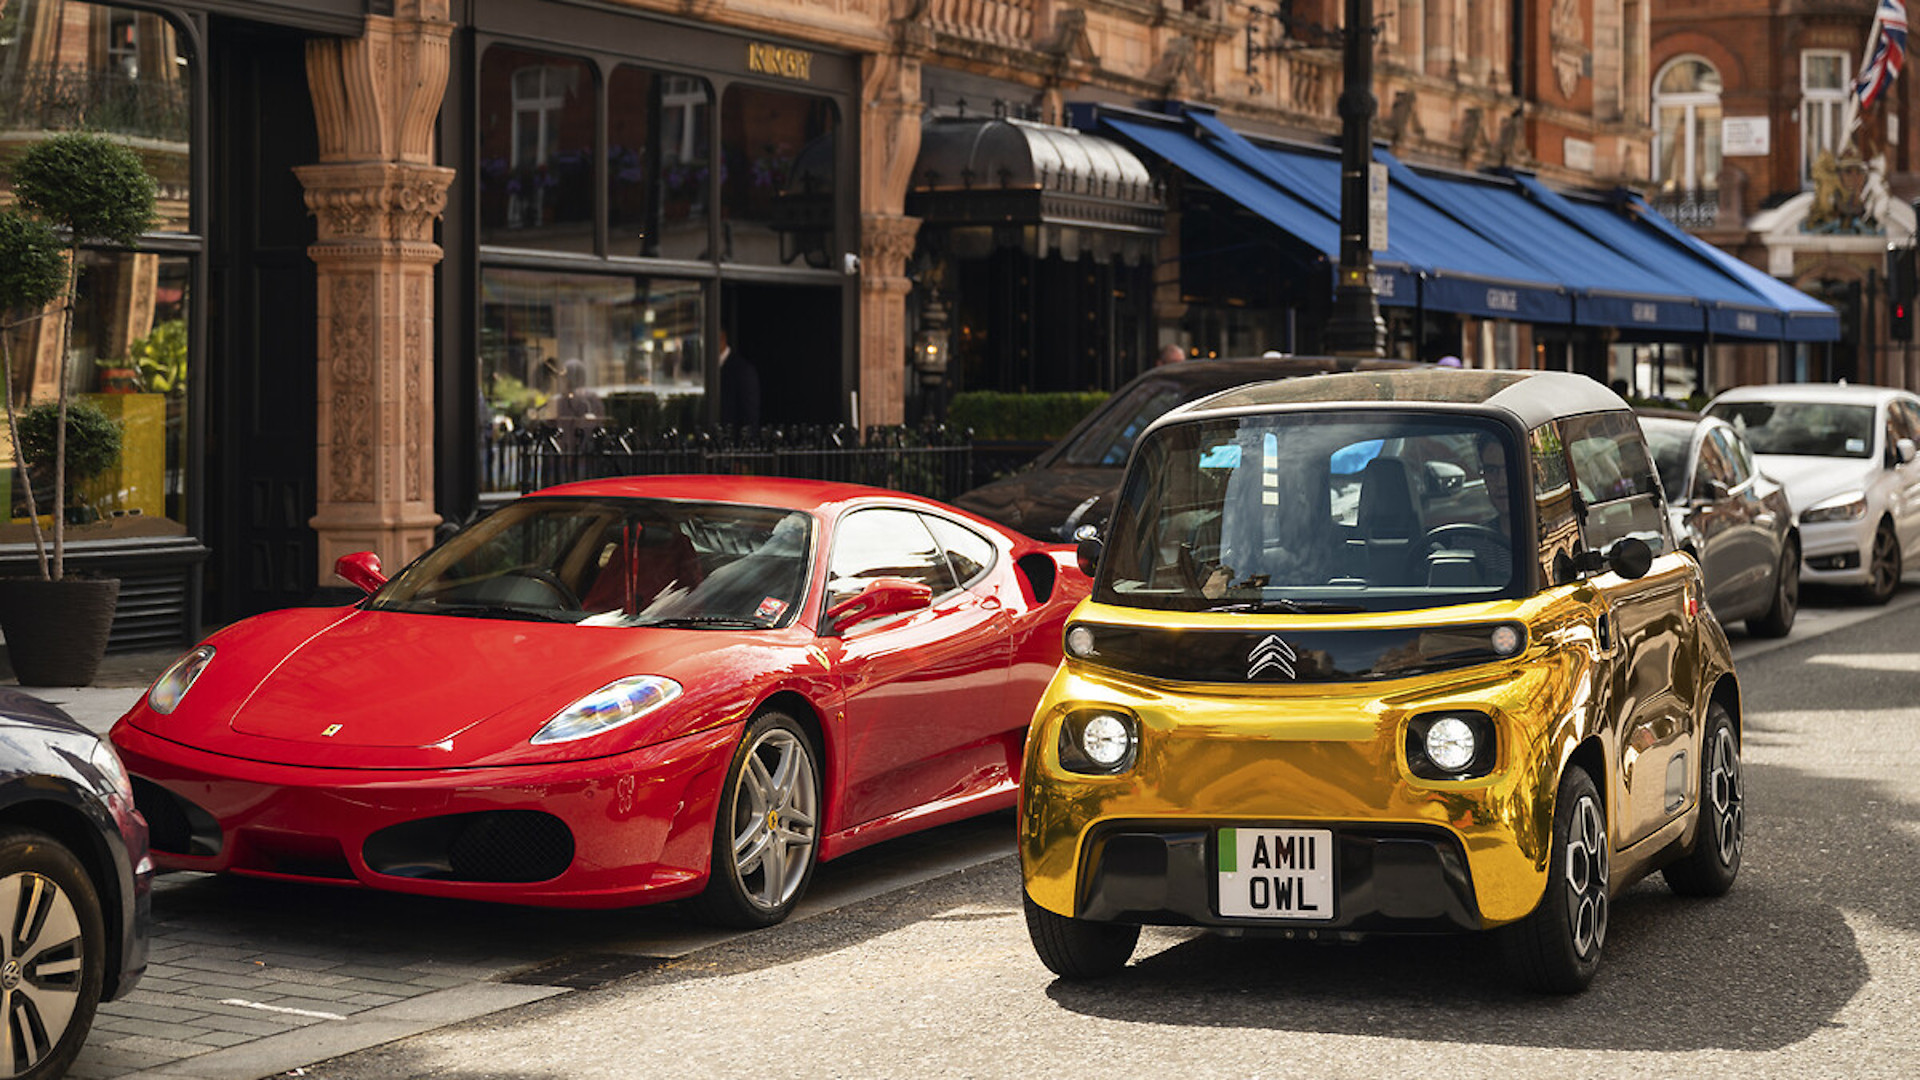 Gold wrapped Citroën Ami takes on London supercar scene